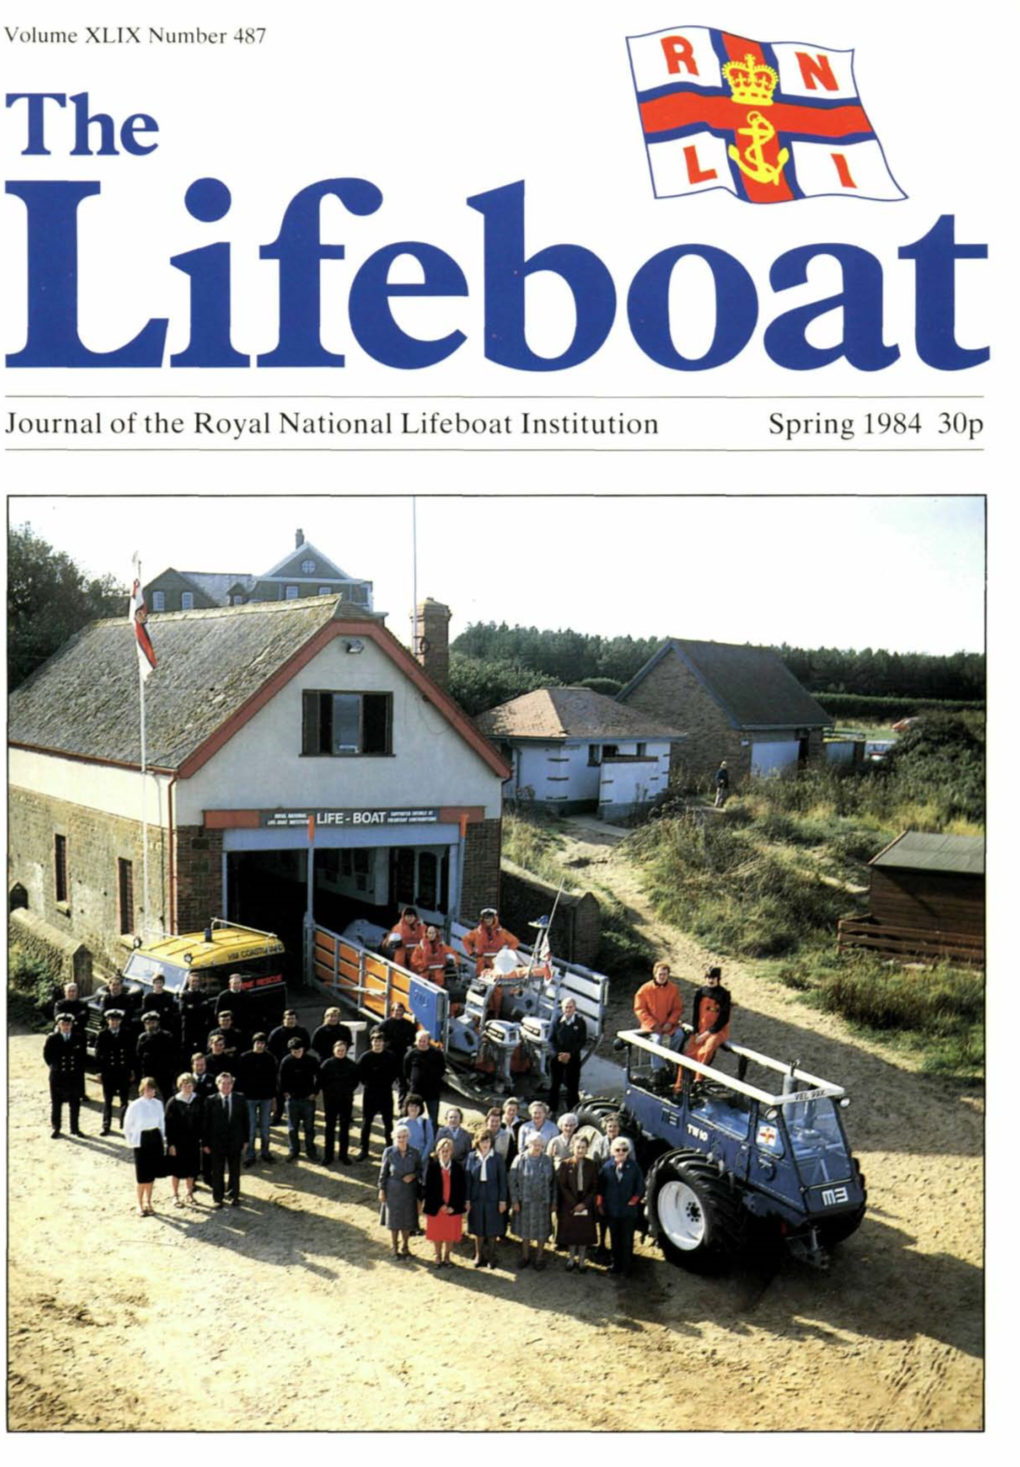 The Lifeboat Journal of the Royal National Lifeboat Institution Spring 1984 30P